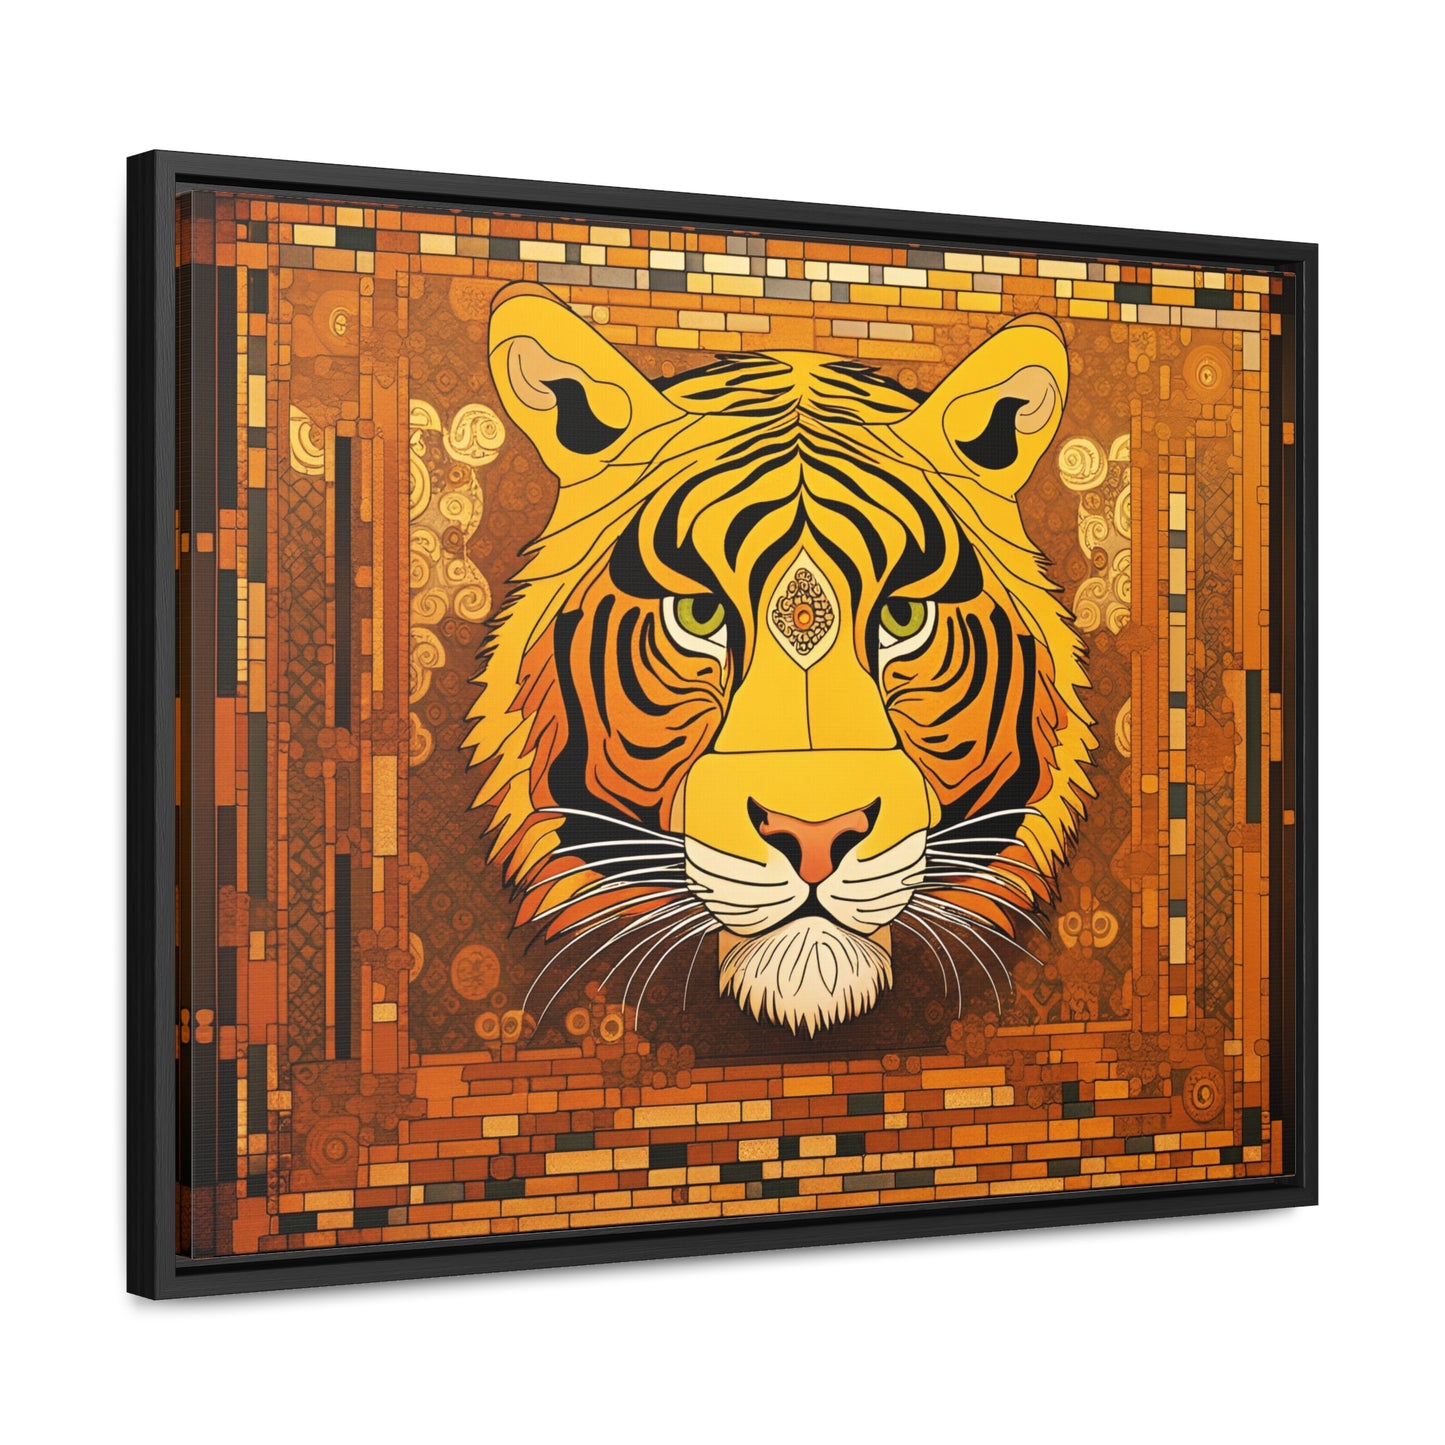 Tiger Themed Modern Wall Art - Tiger Head in the Style of Gustav Klimt Print on Canvas in a Floating Frame